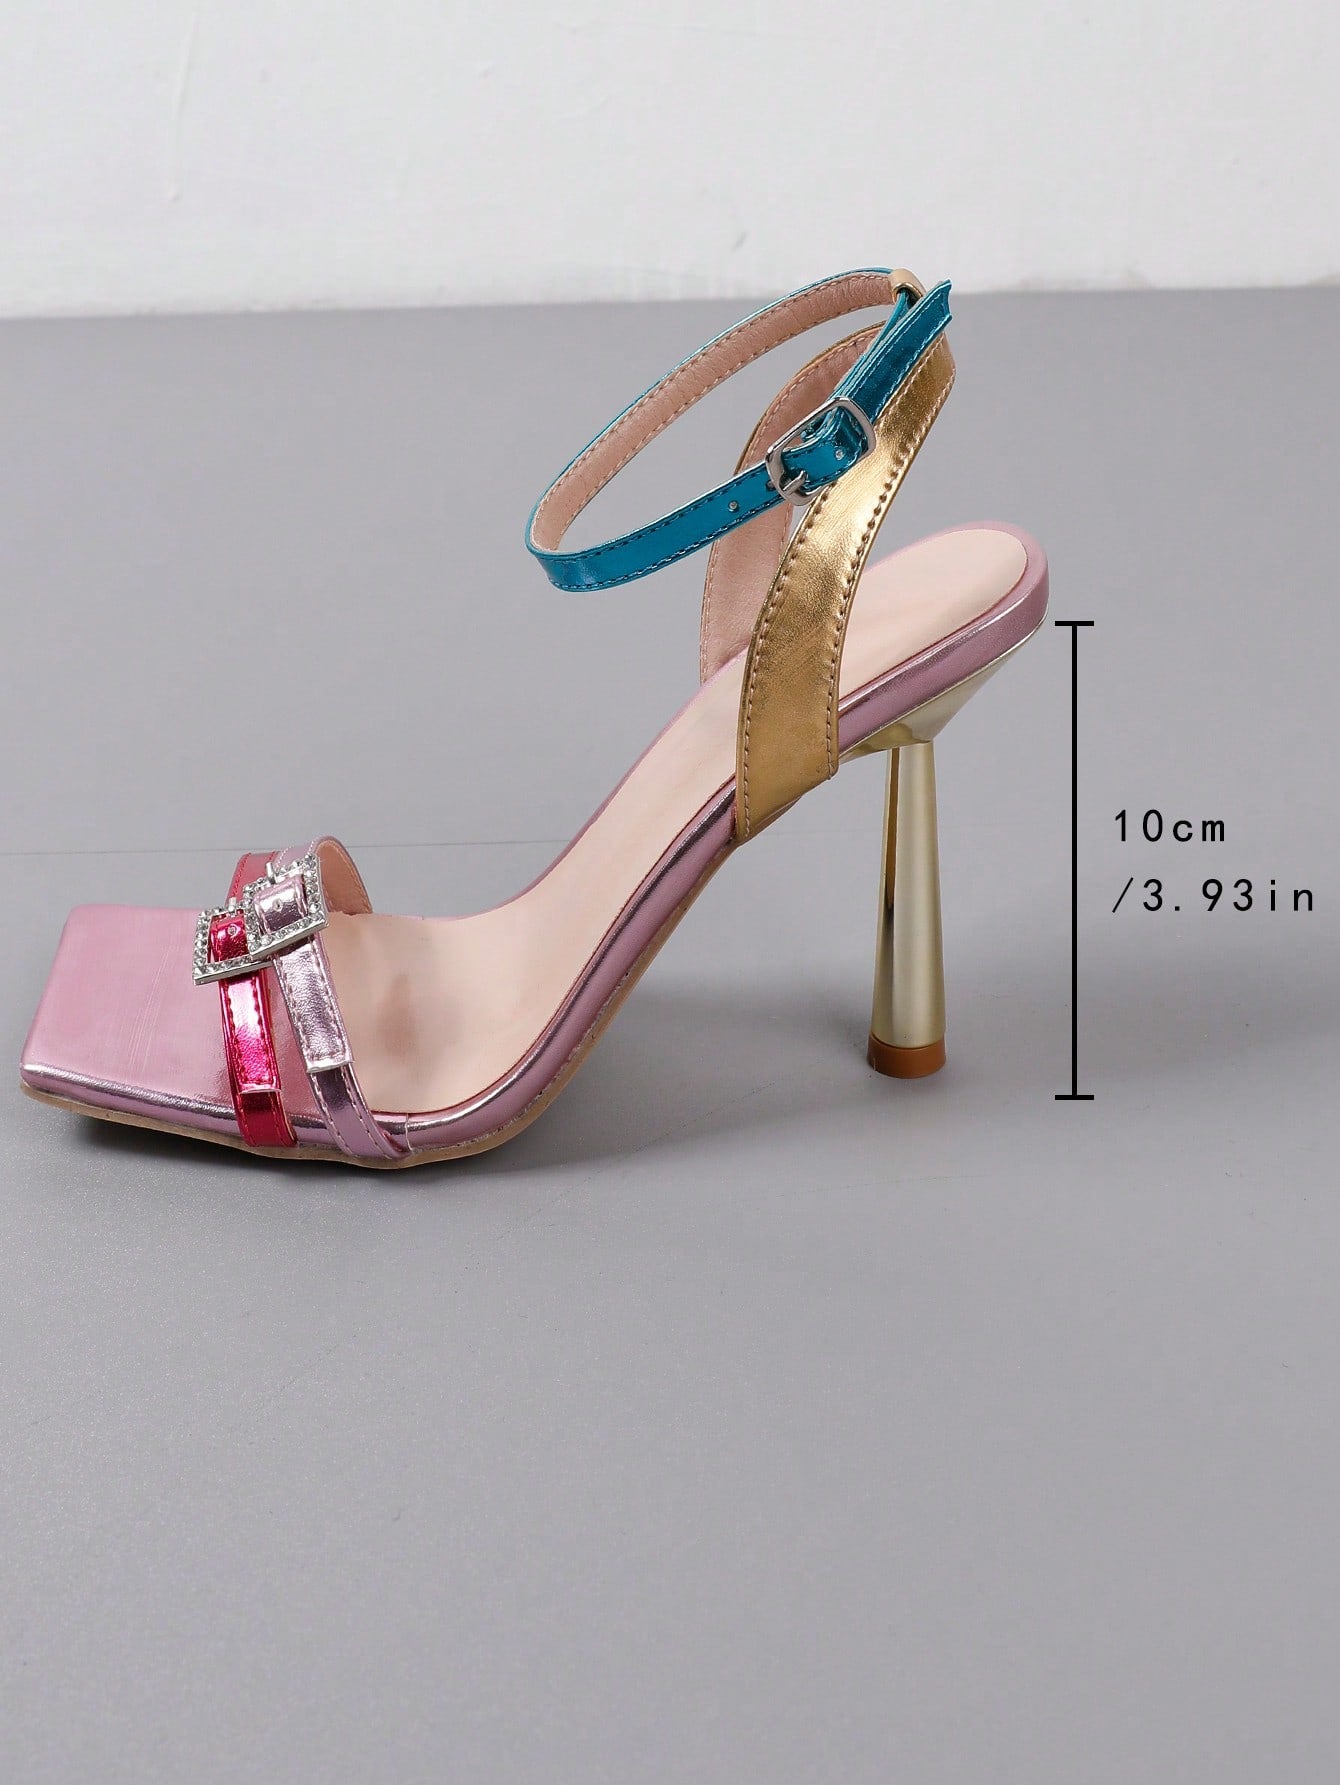 Fashionably Chic Rhinestone Buckle Design Ankle Strap Open Toe Ankle Strap Sandals